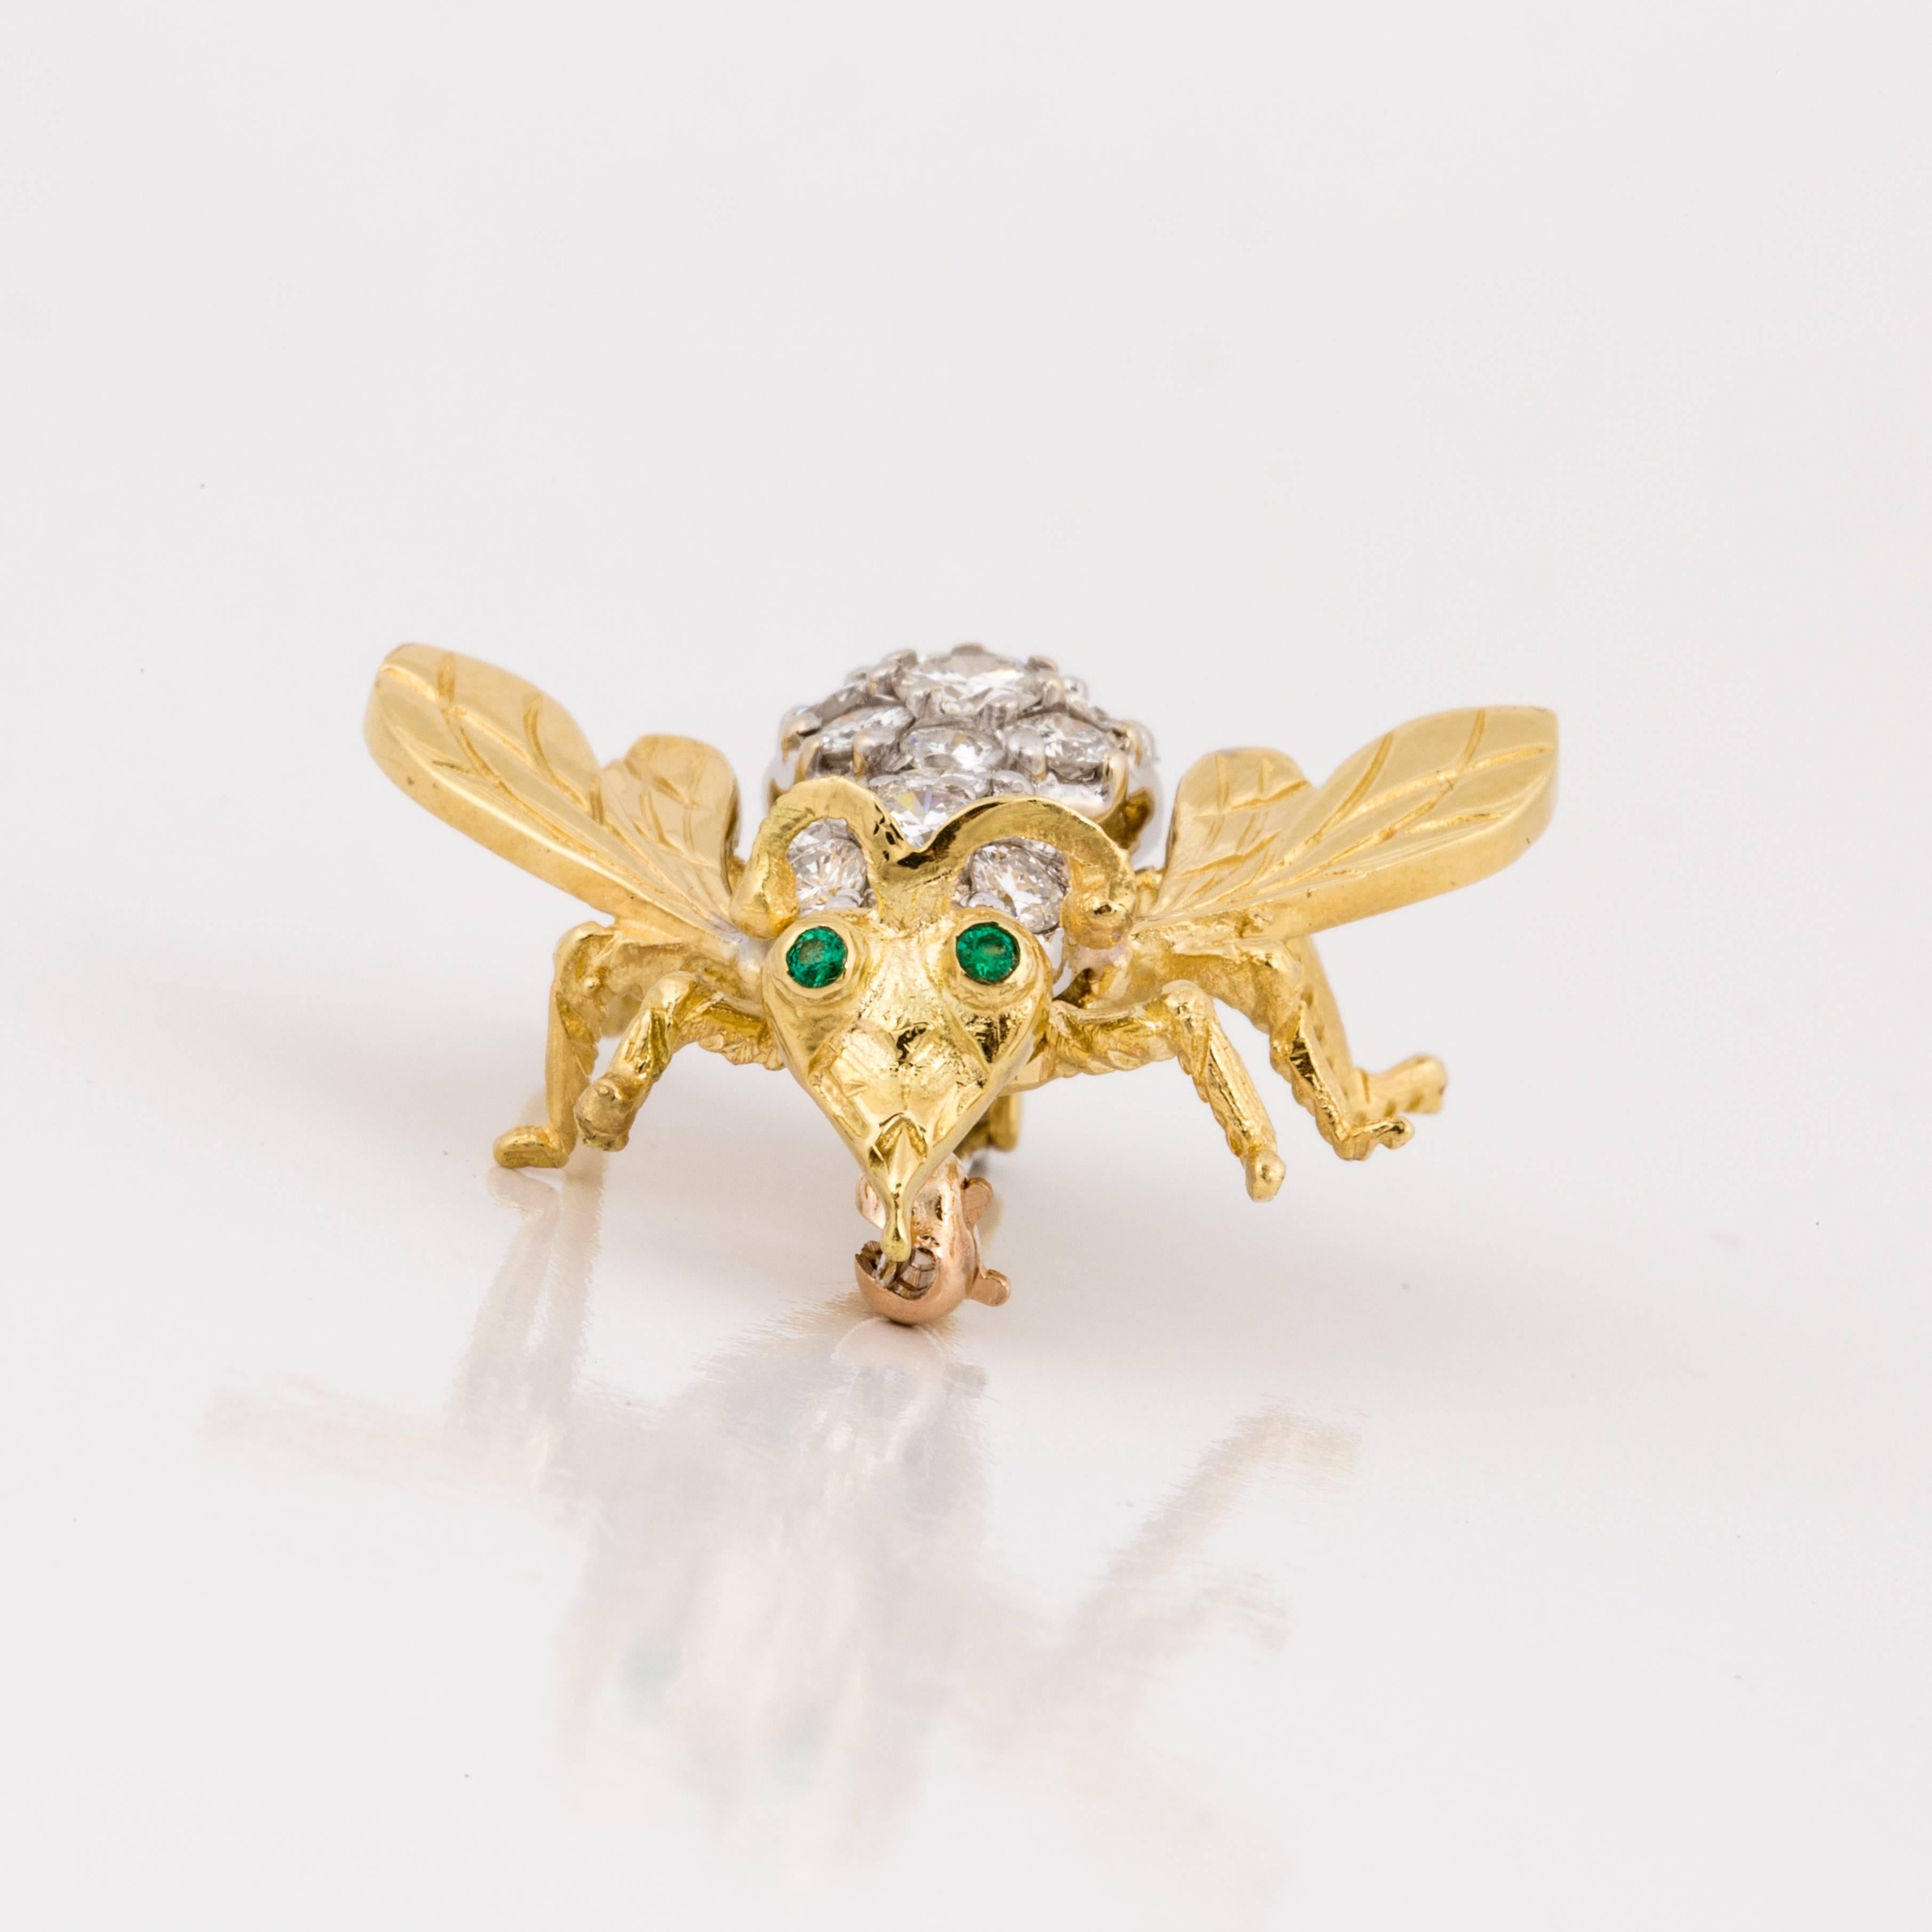 18K yellow gold pin depicting a bee with pavé round diamonds and cabochon emerald eyes.  The back is encrusted with 24 diamonds that total 1.60 carats, H-I color and SI2 clarity.   Pin measures 1 inch long and 1 1/8 inches wide.